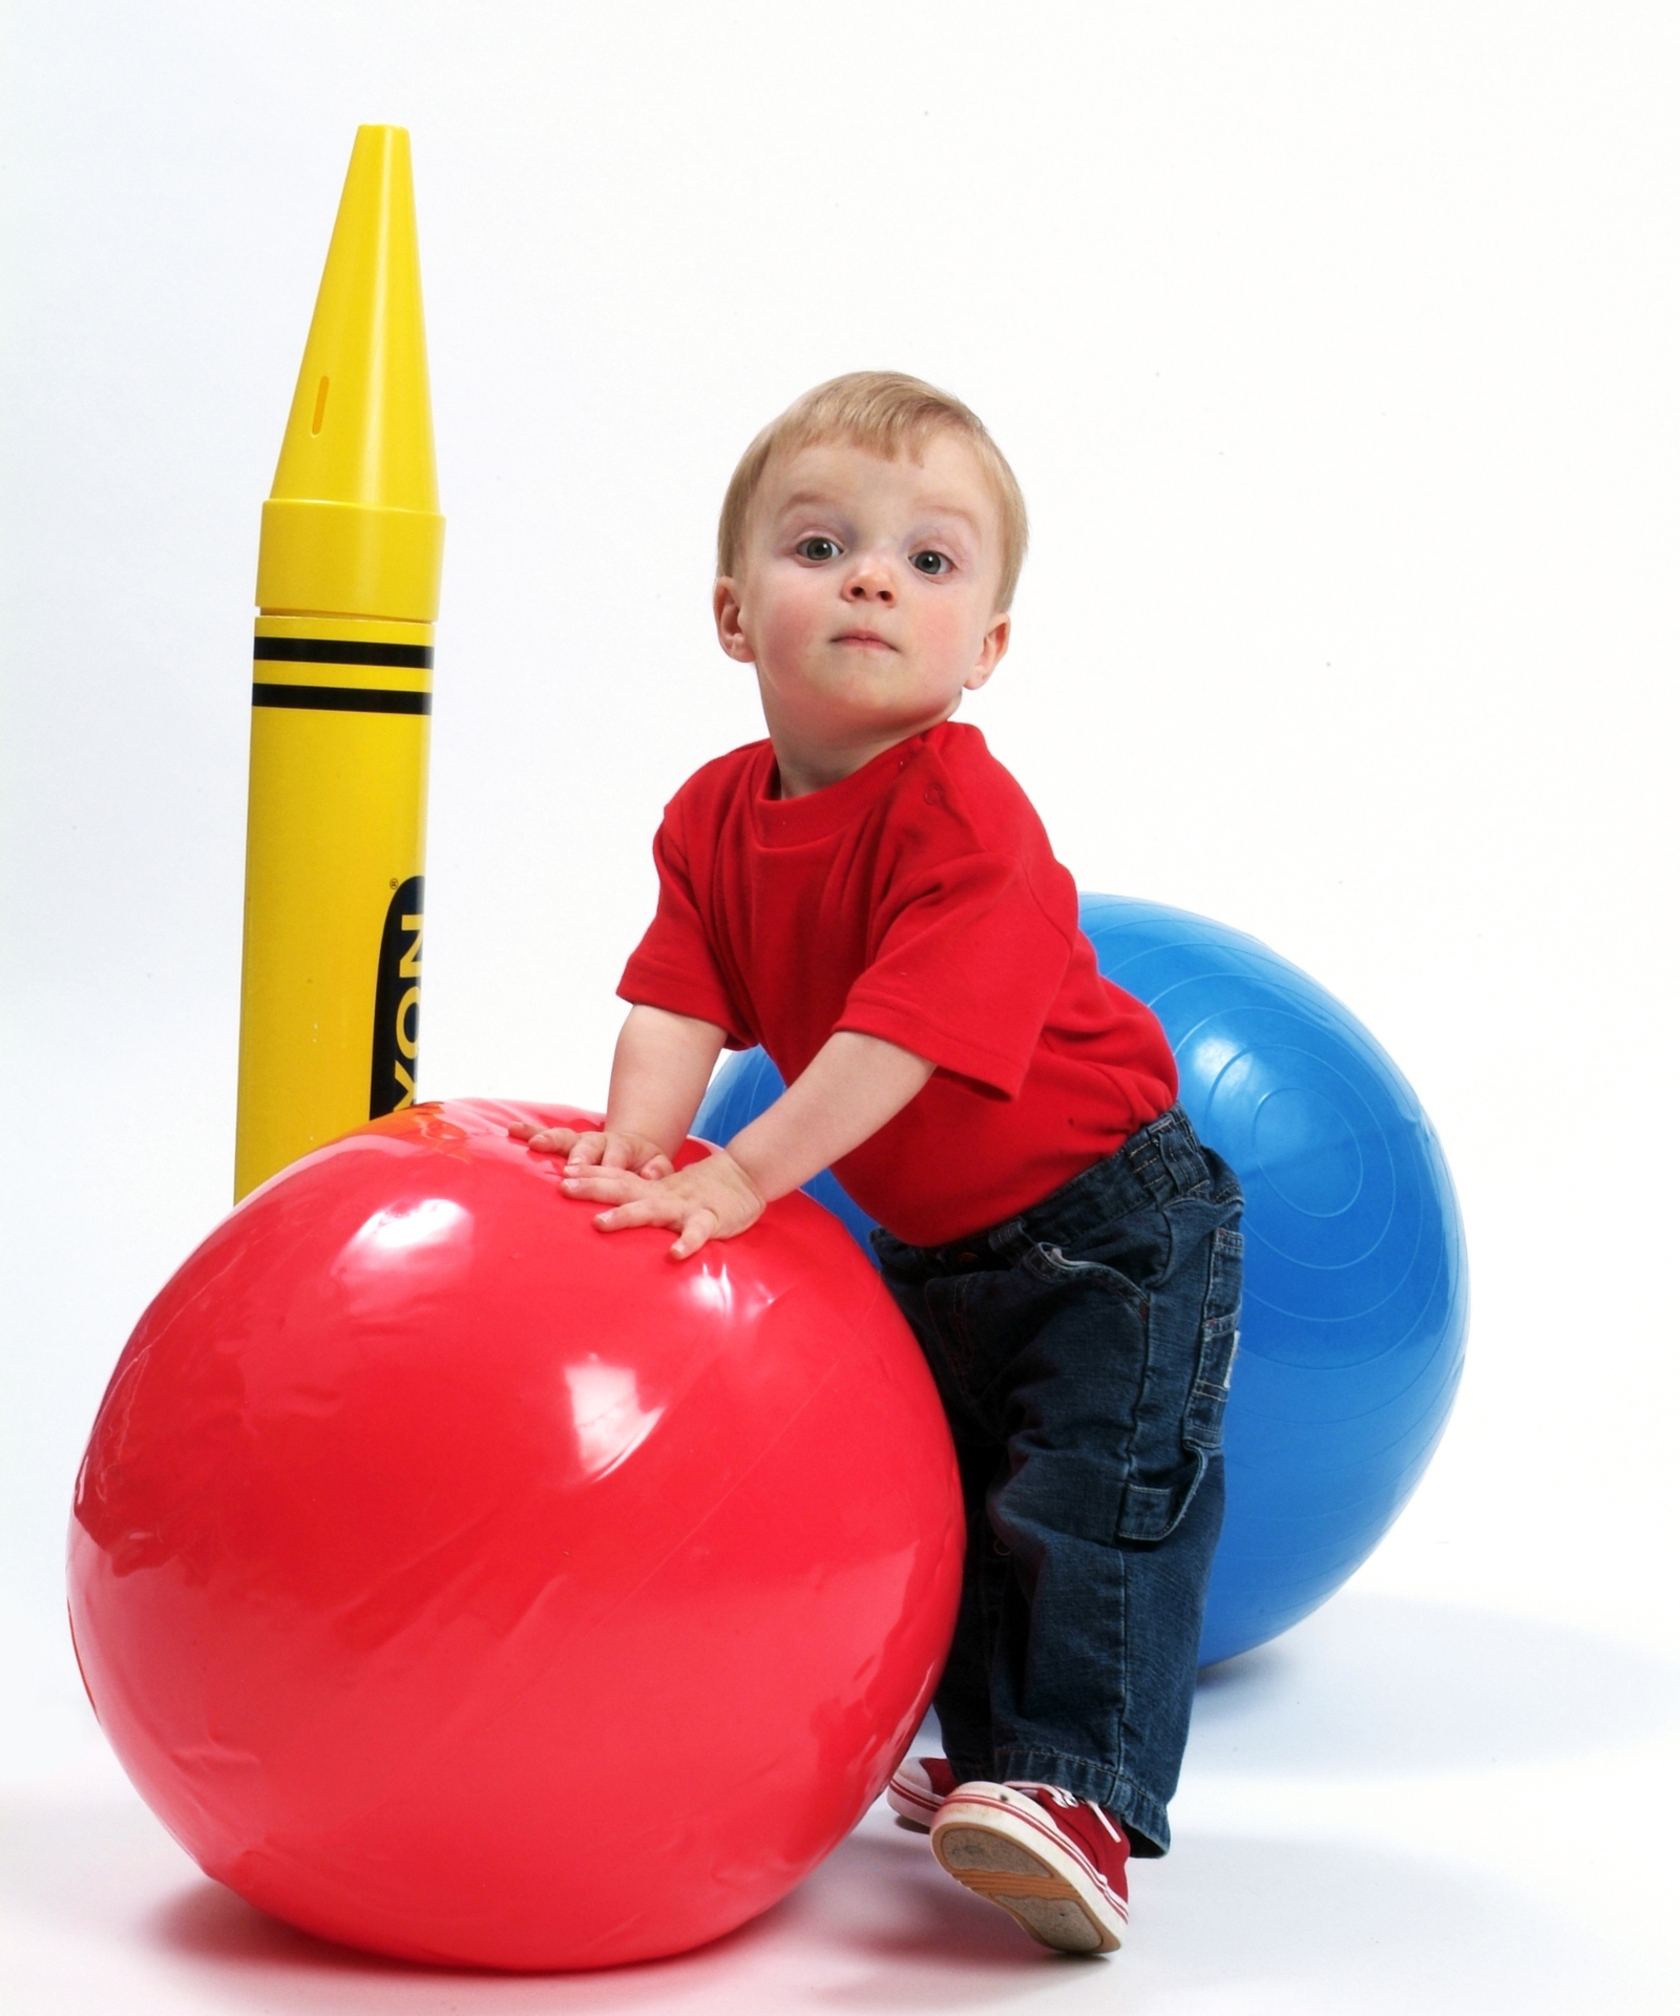 Toddler with ball